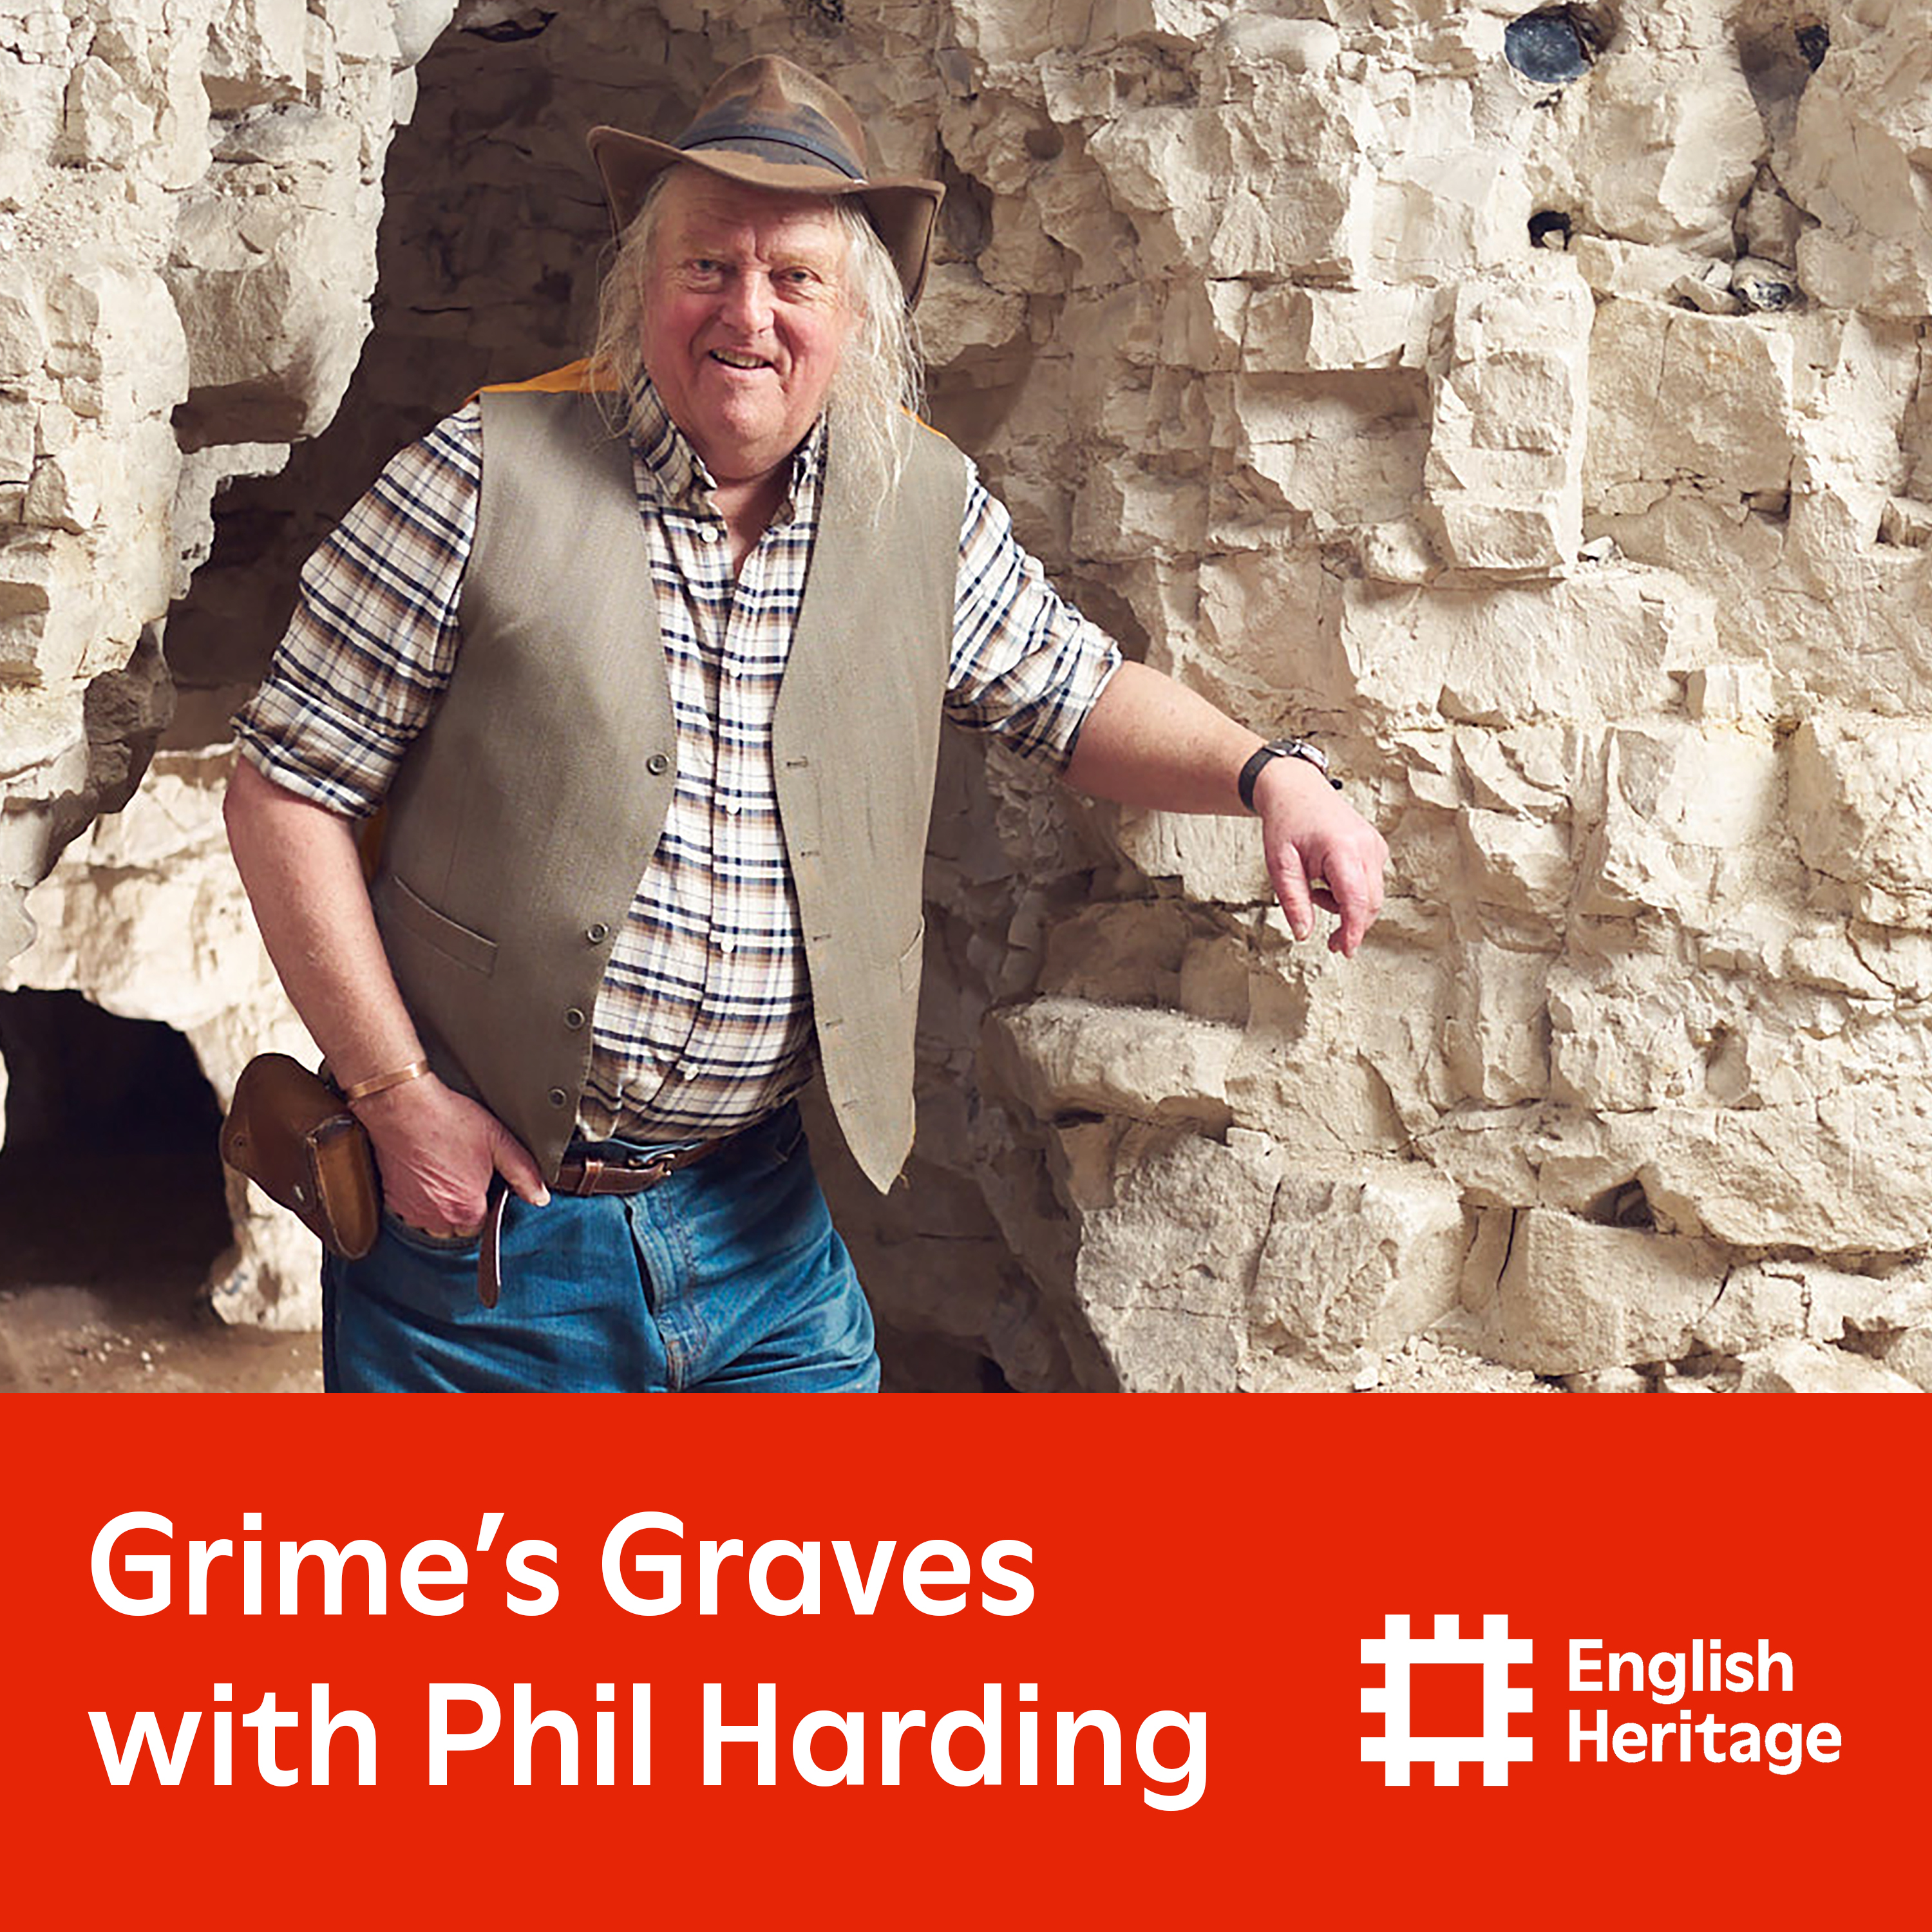 Grime's Graves with Phil Harding